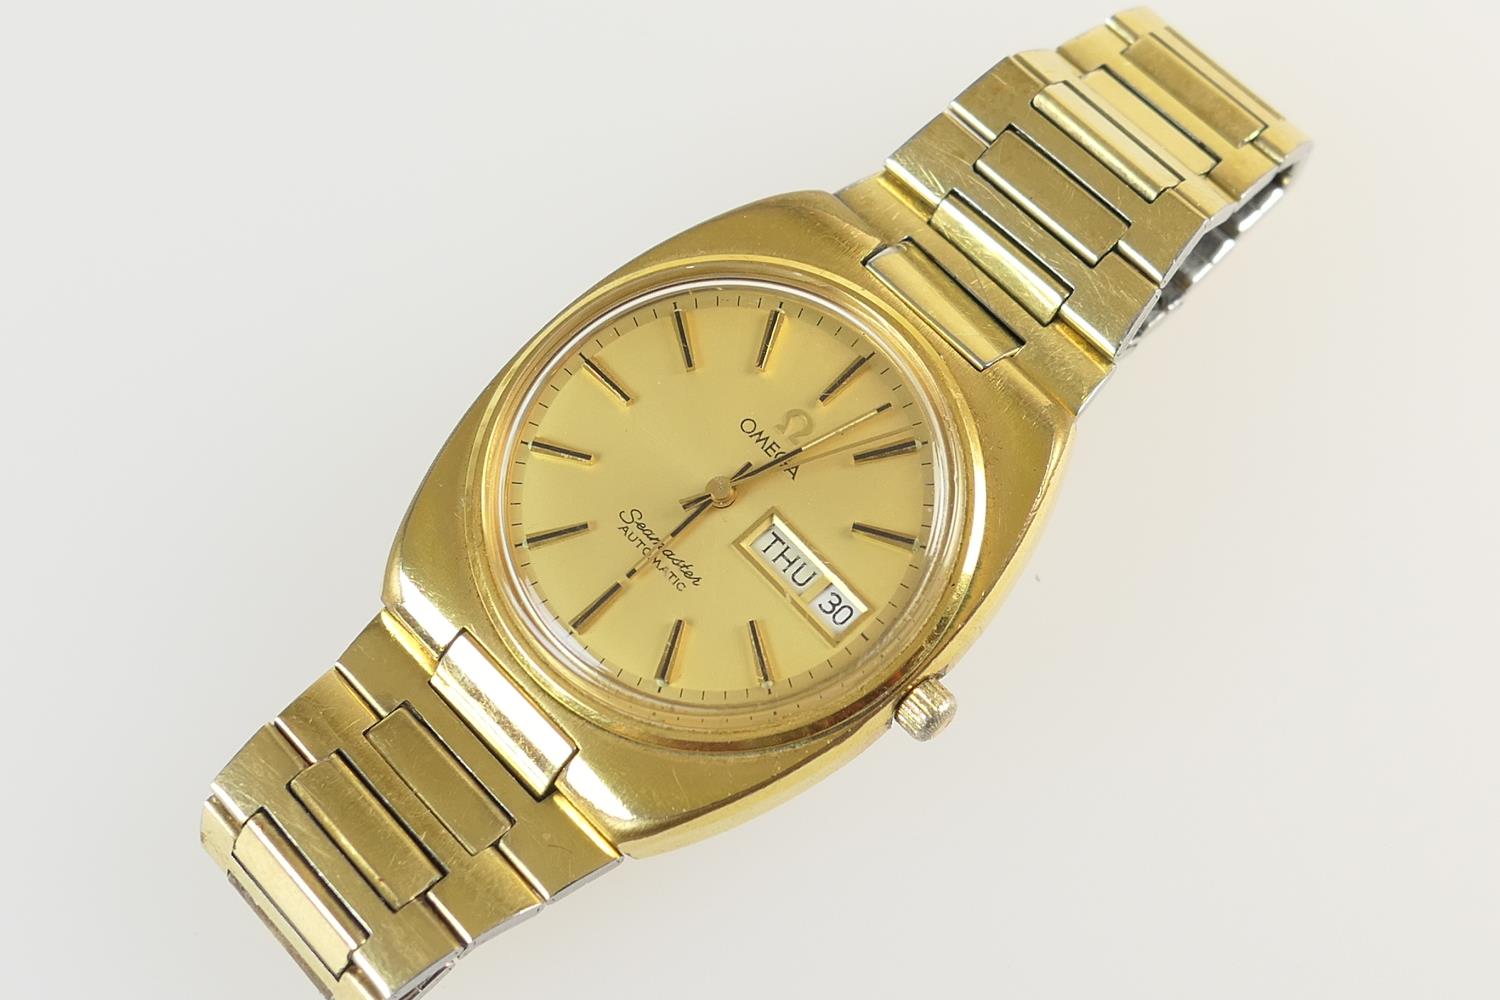 Omega Seamaster gent's gold plated wristwatch, circa 1960s, 27mm gold coloured dial with day and